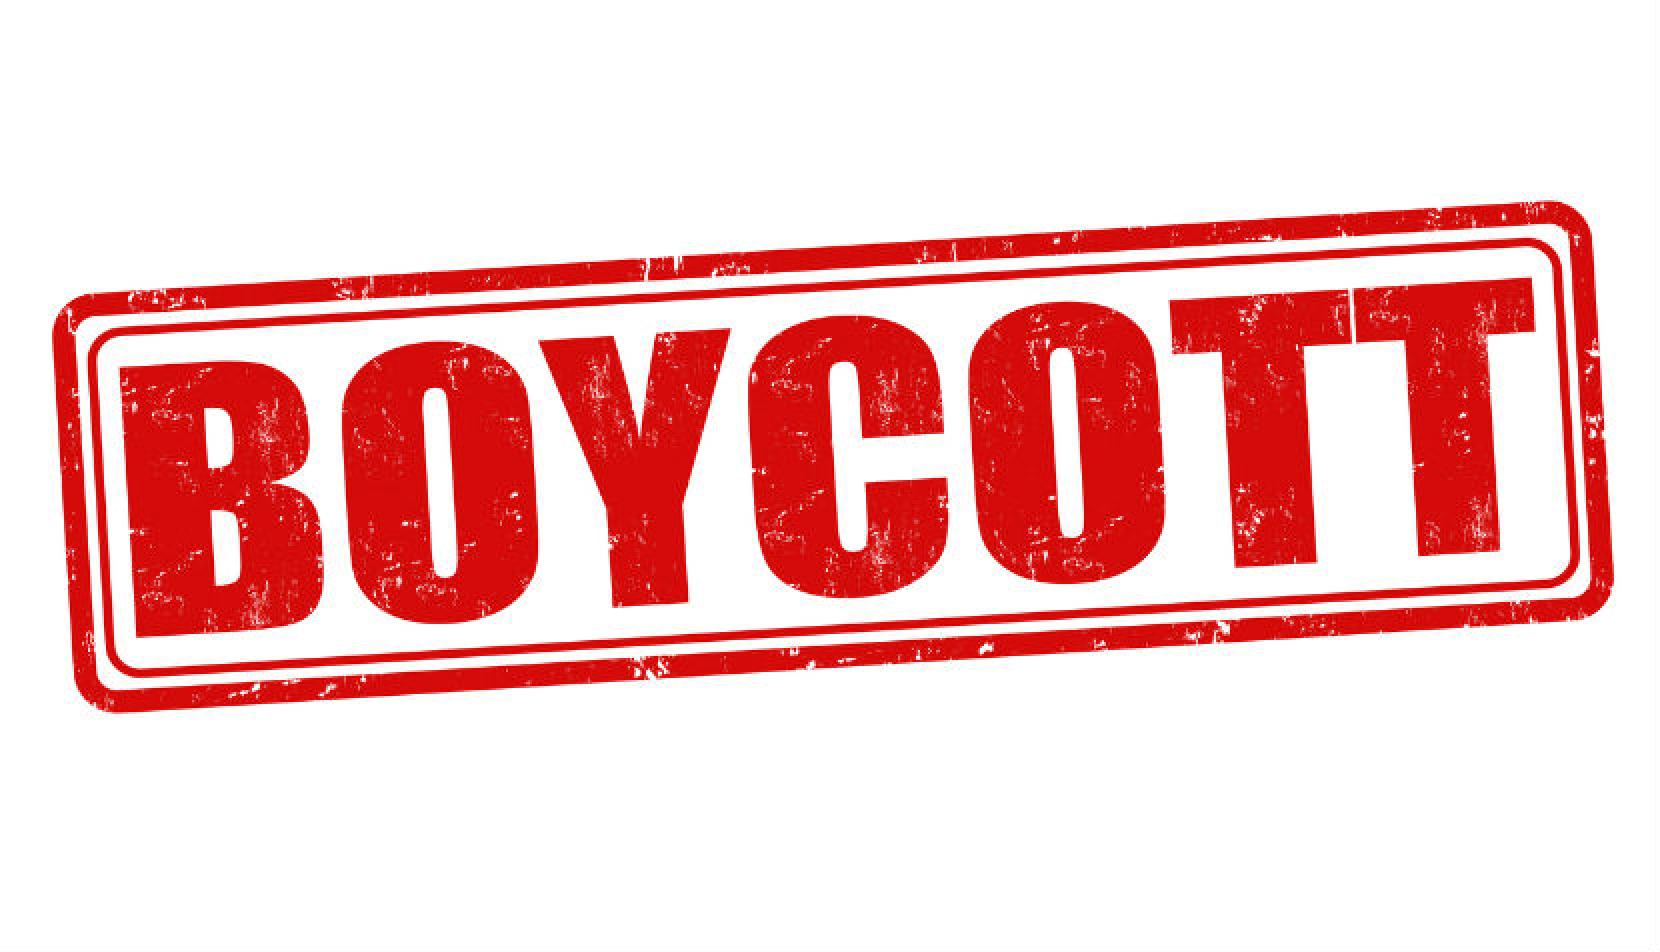 Clipper Media News Takes a Stand on ‘Consumer Boycotts’